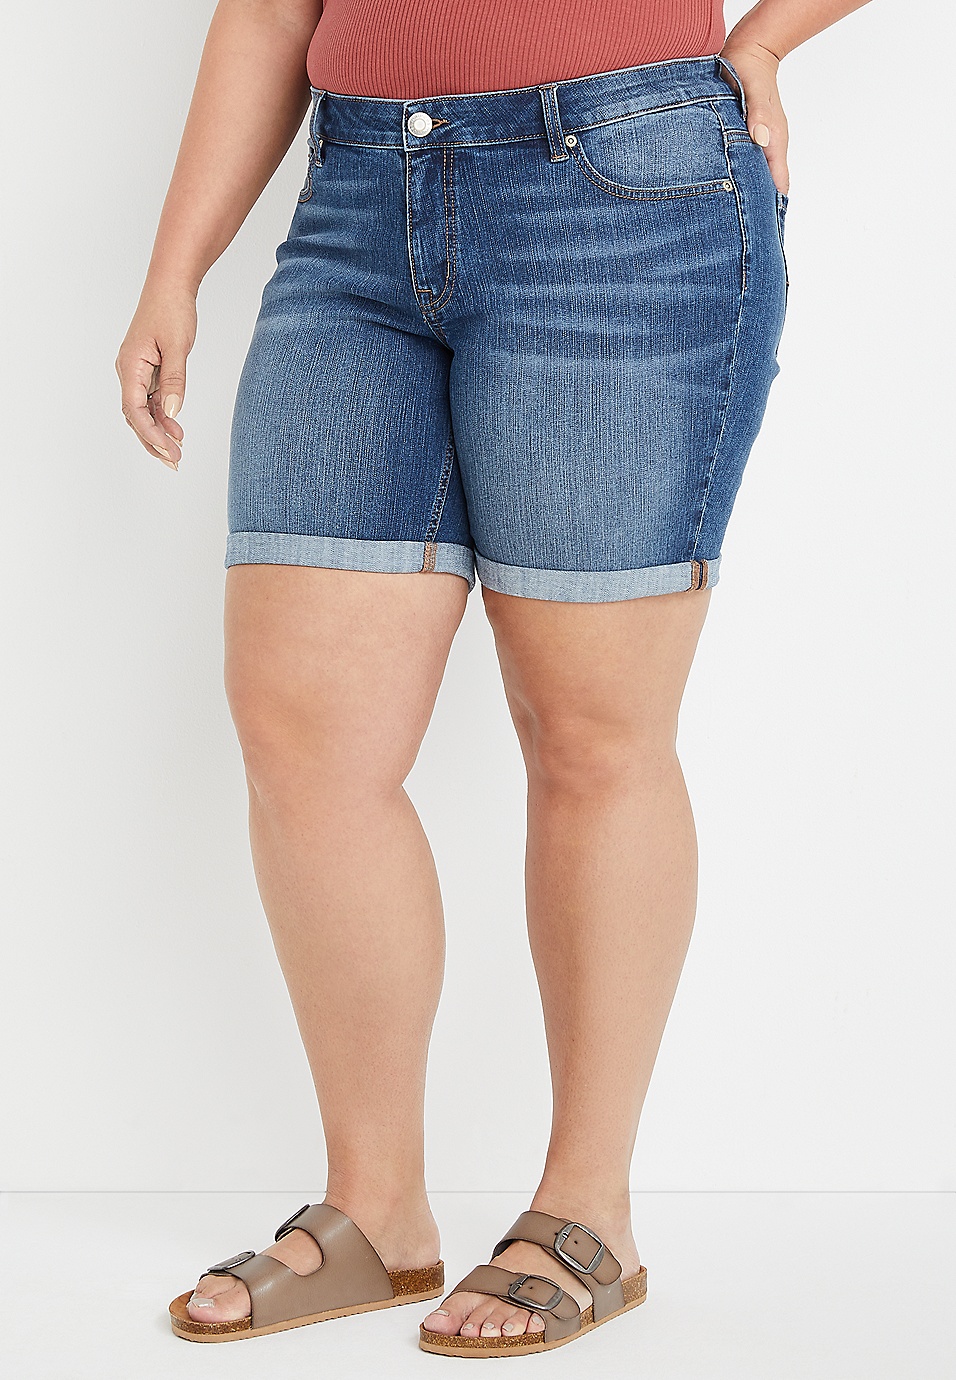 Plus Size m by maurices™ Mid Rise Bermuda Short | maurices